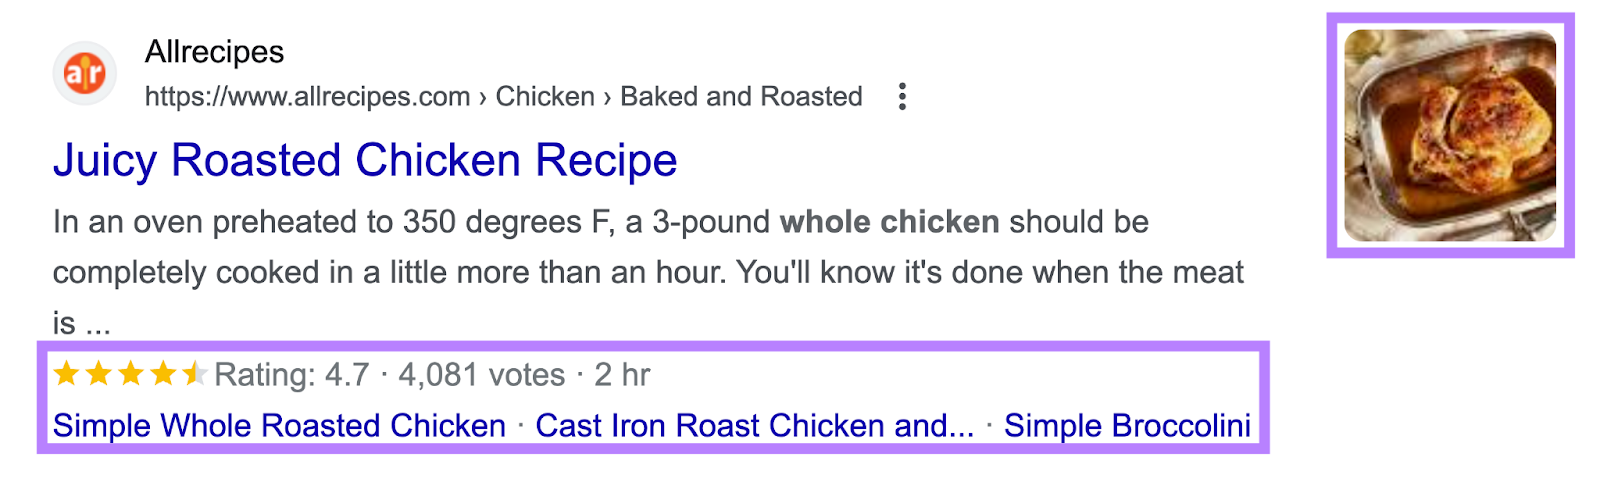 Google result showing "Juicy Roasted Chicken Recipe" page with reviews below